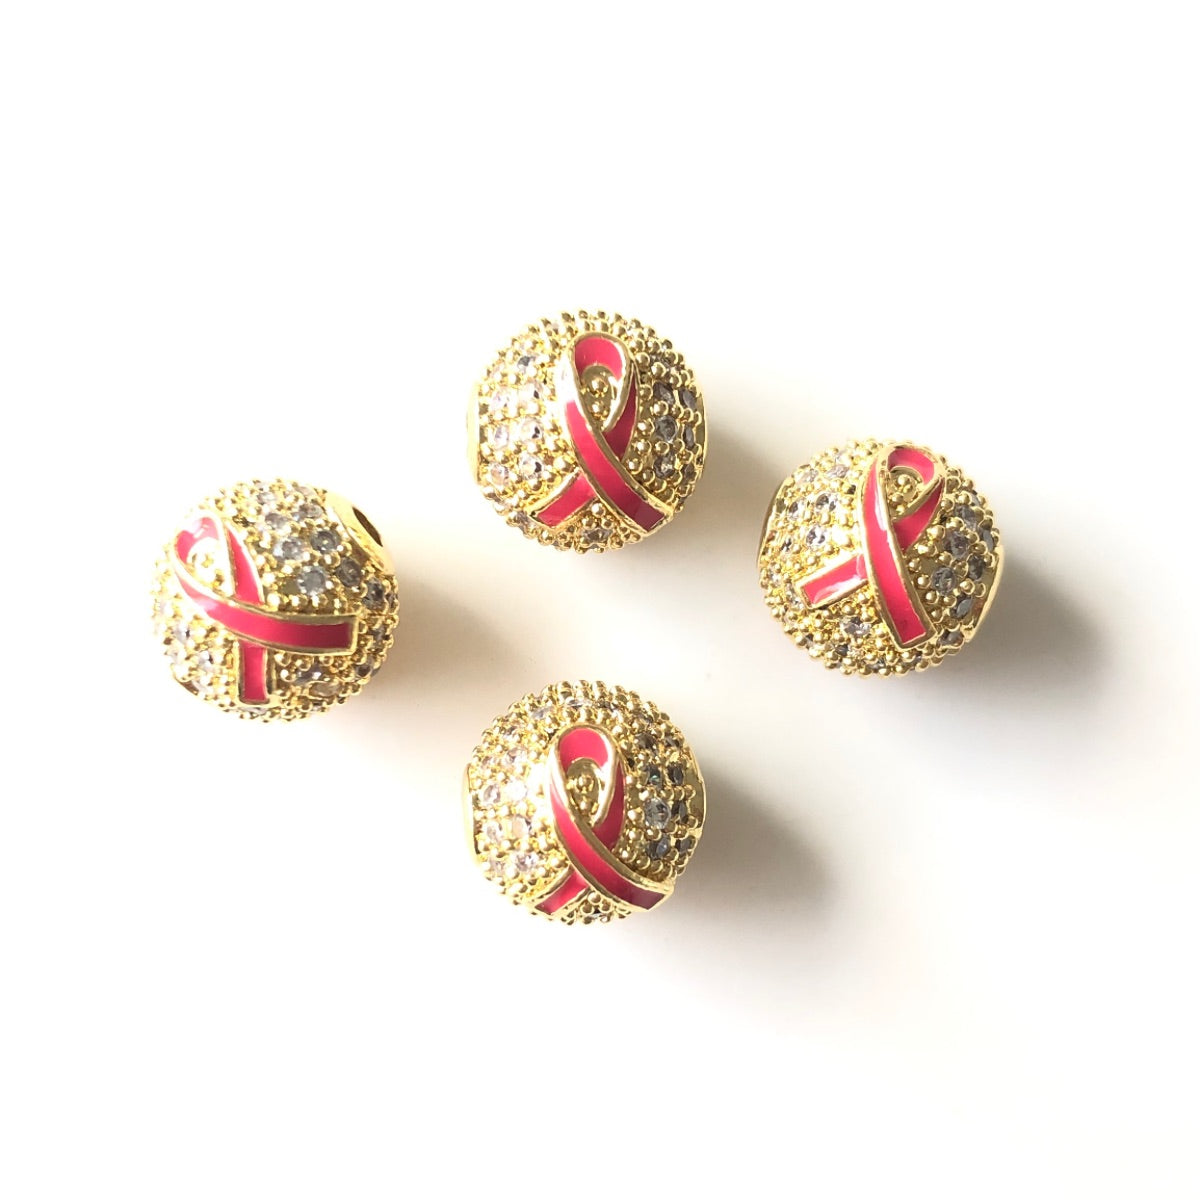 10-20-50pcs/lot 10mm CZ Paved Breast Cancer Awareness Pink Ribbon Ball Spacers Beads Gold CZ Paved Spacers 10mm Beads Ball Beads Breast Cancer Awareness New Spacers Arrivals Charms Beads Beyond